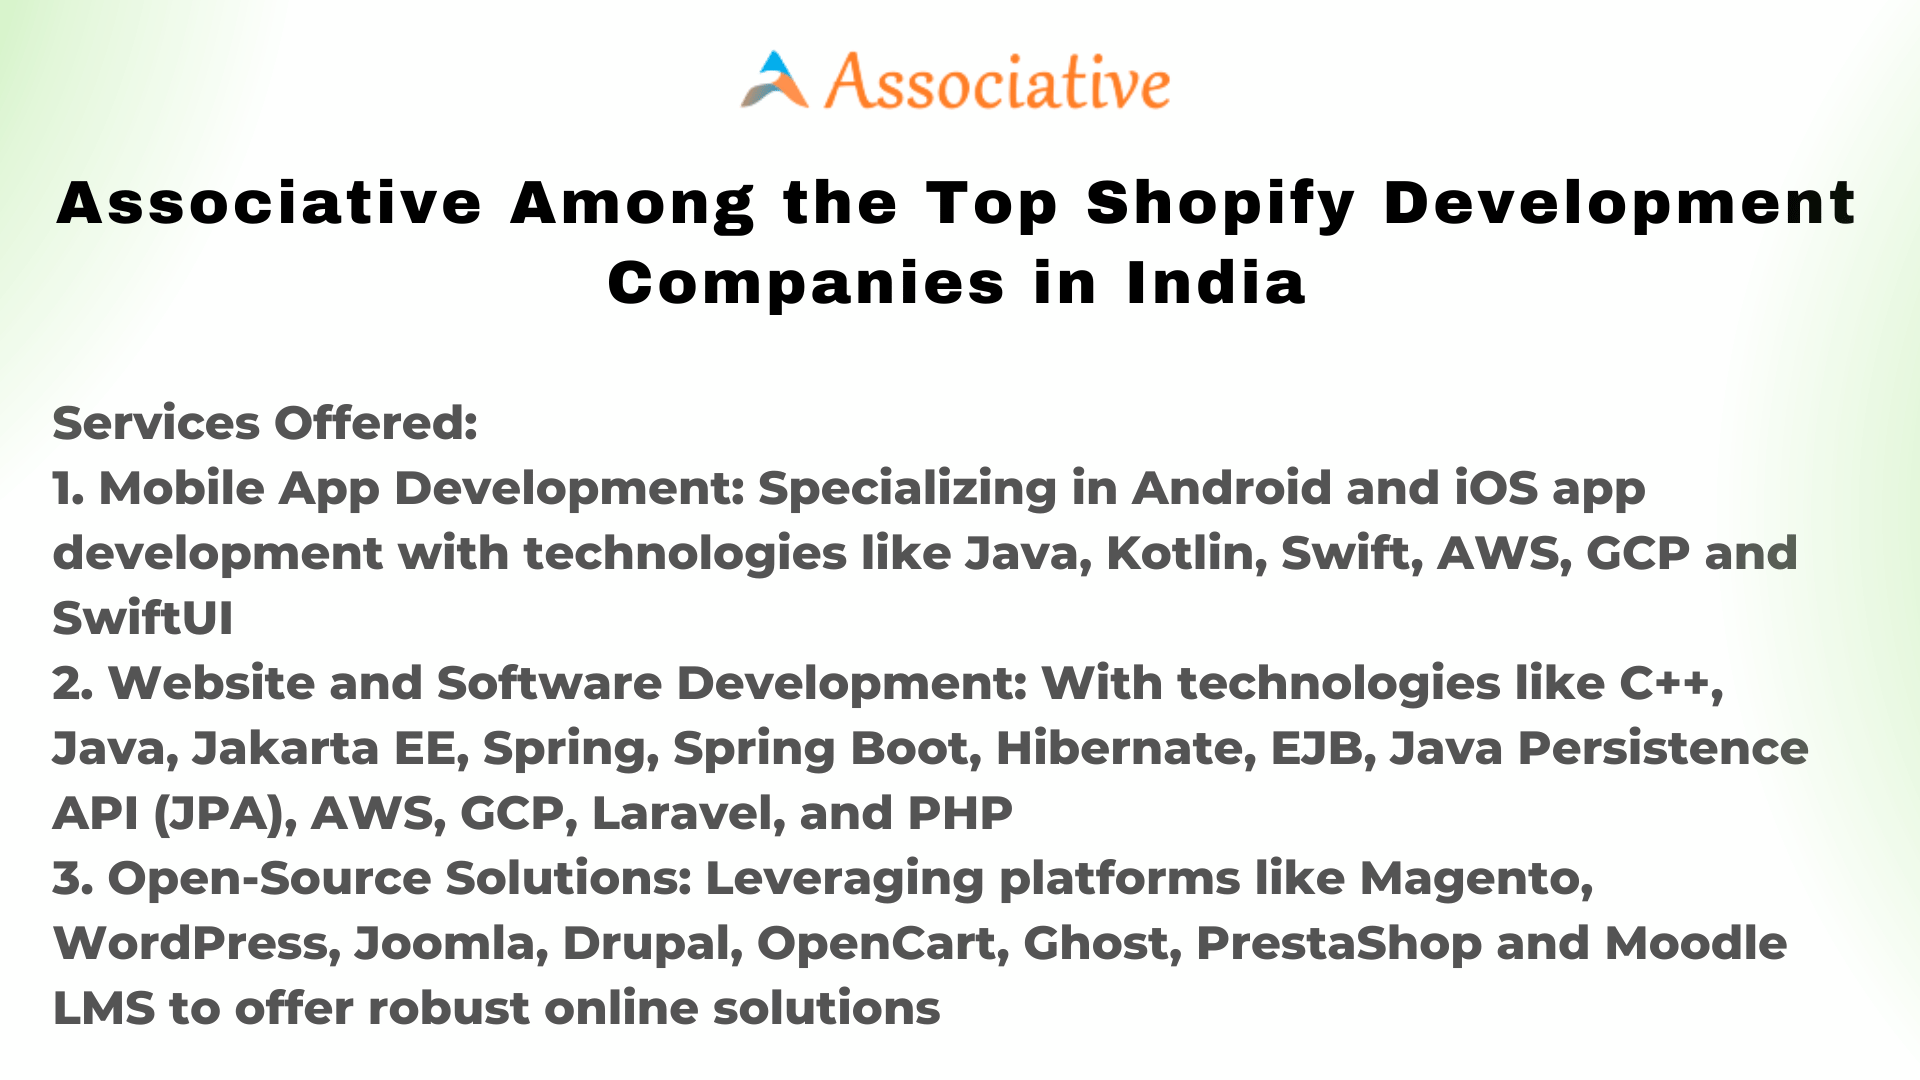 Associative Among the Top Shopify Development Companies in India